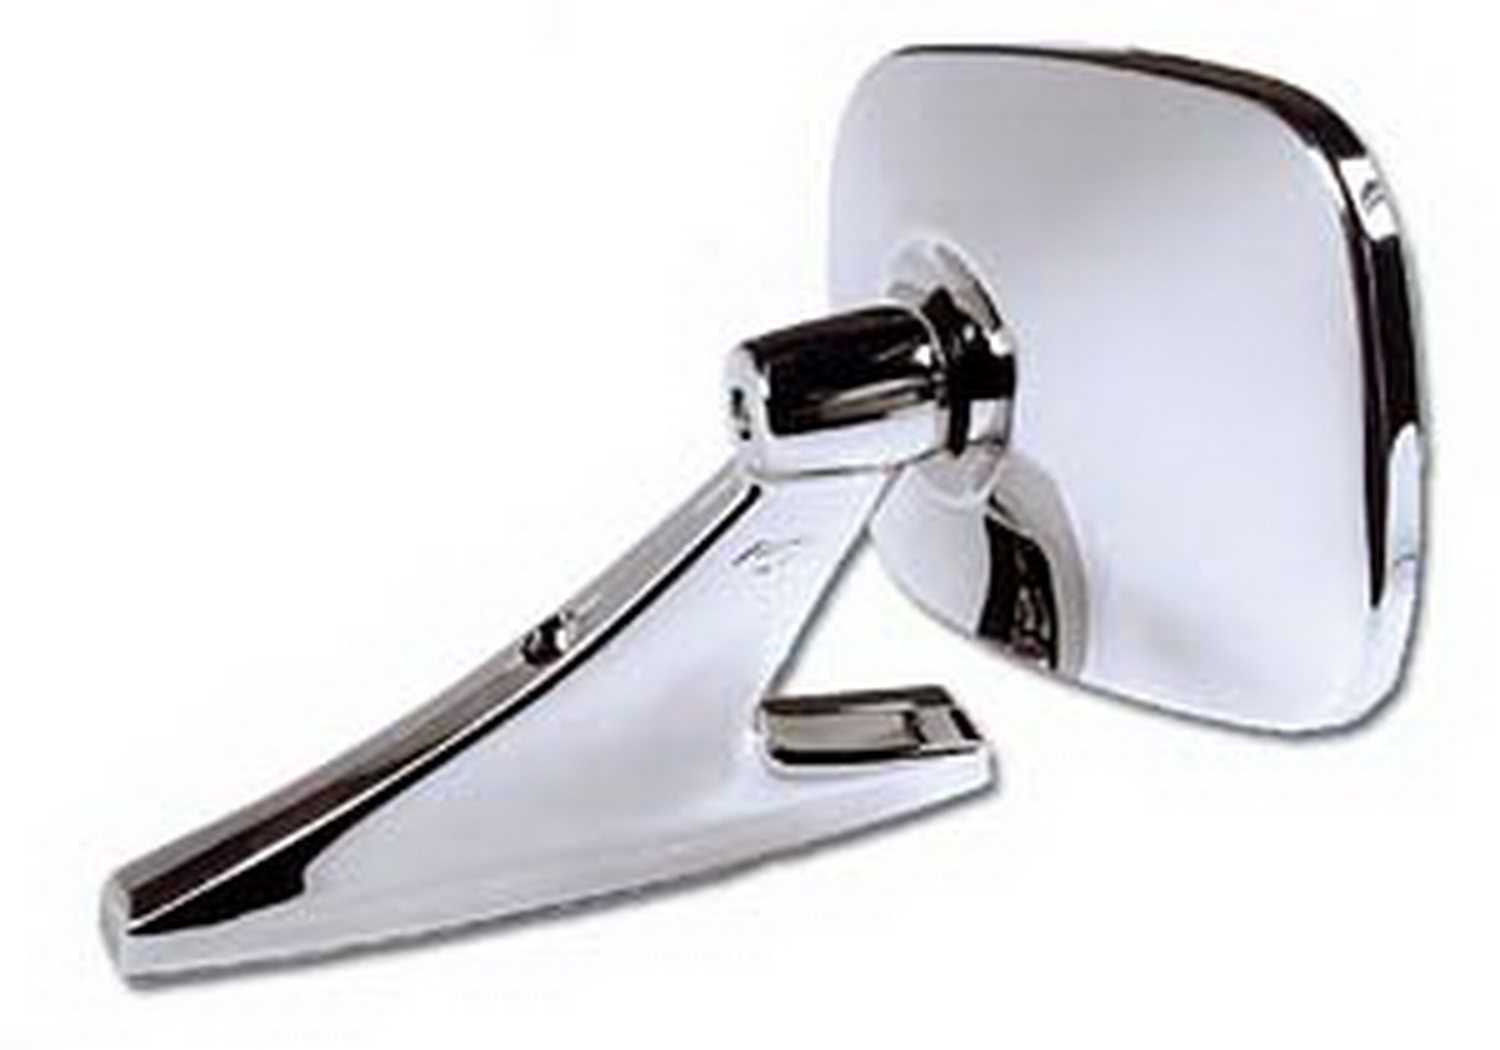 universal Car Rear View Side Mirror at Rs 250/piece in Delhi